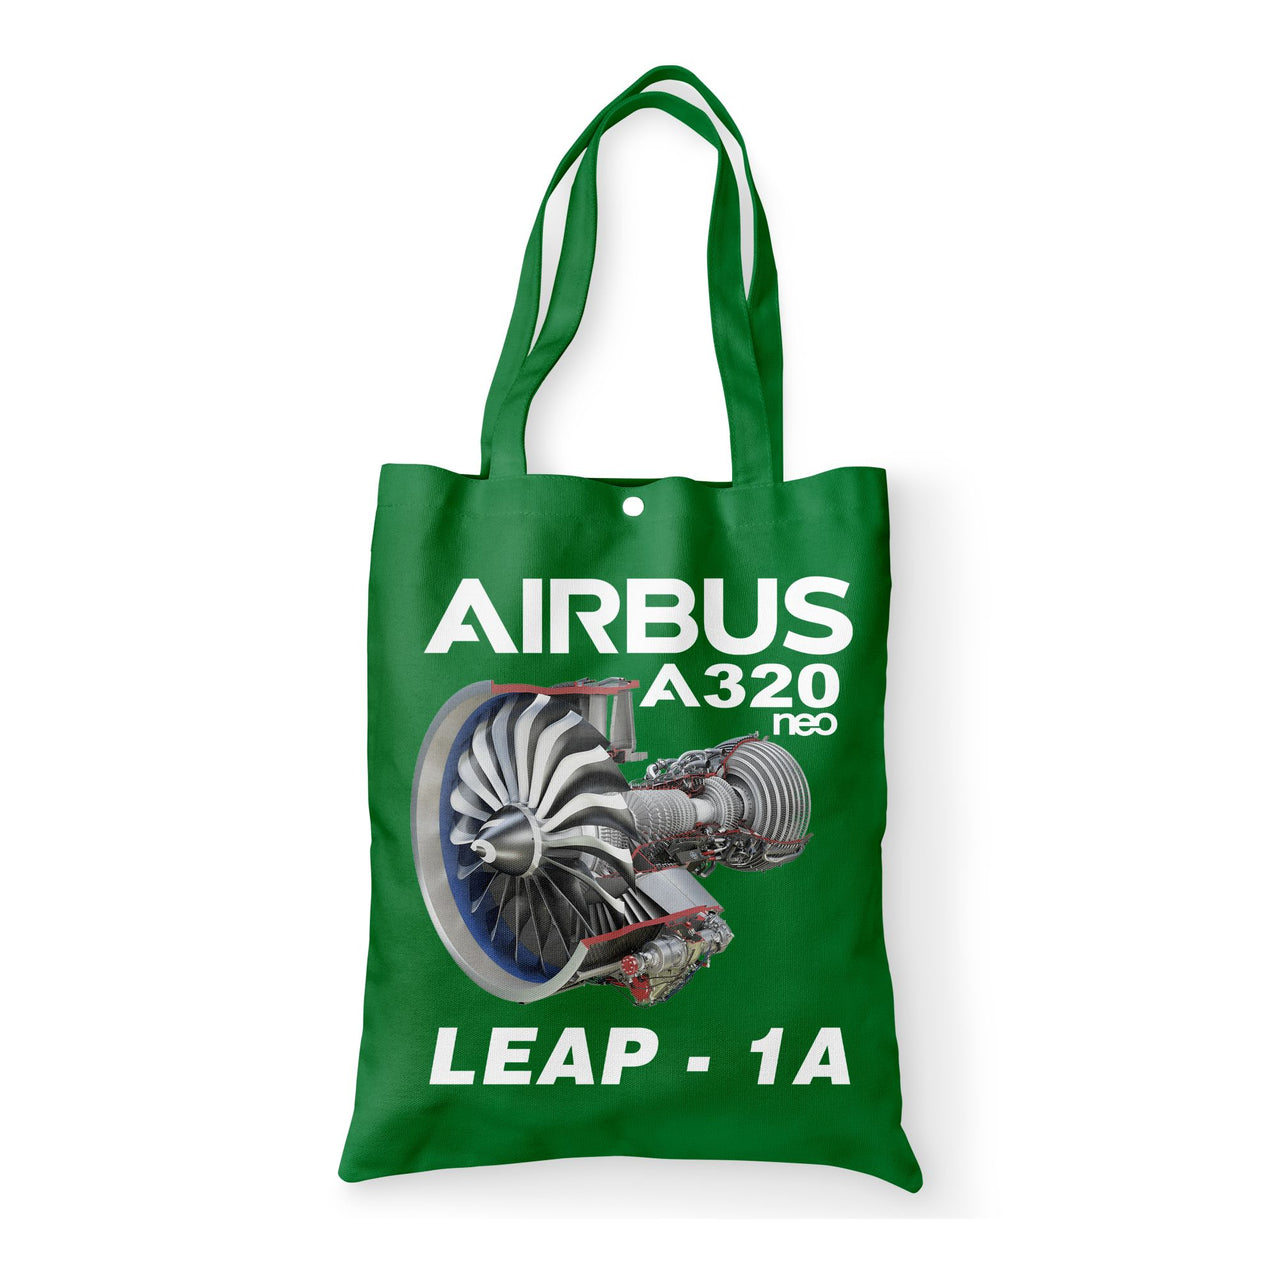 Airbus A320neo & Leap 1A Designed Tote Bags